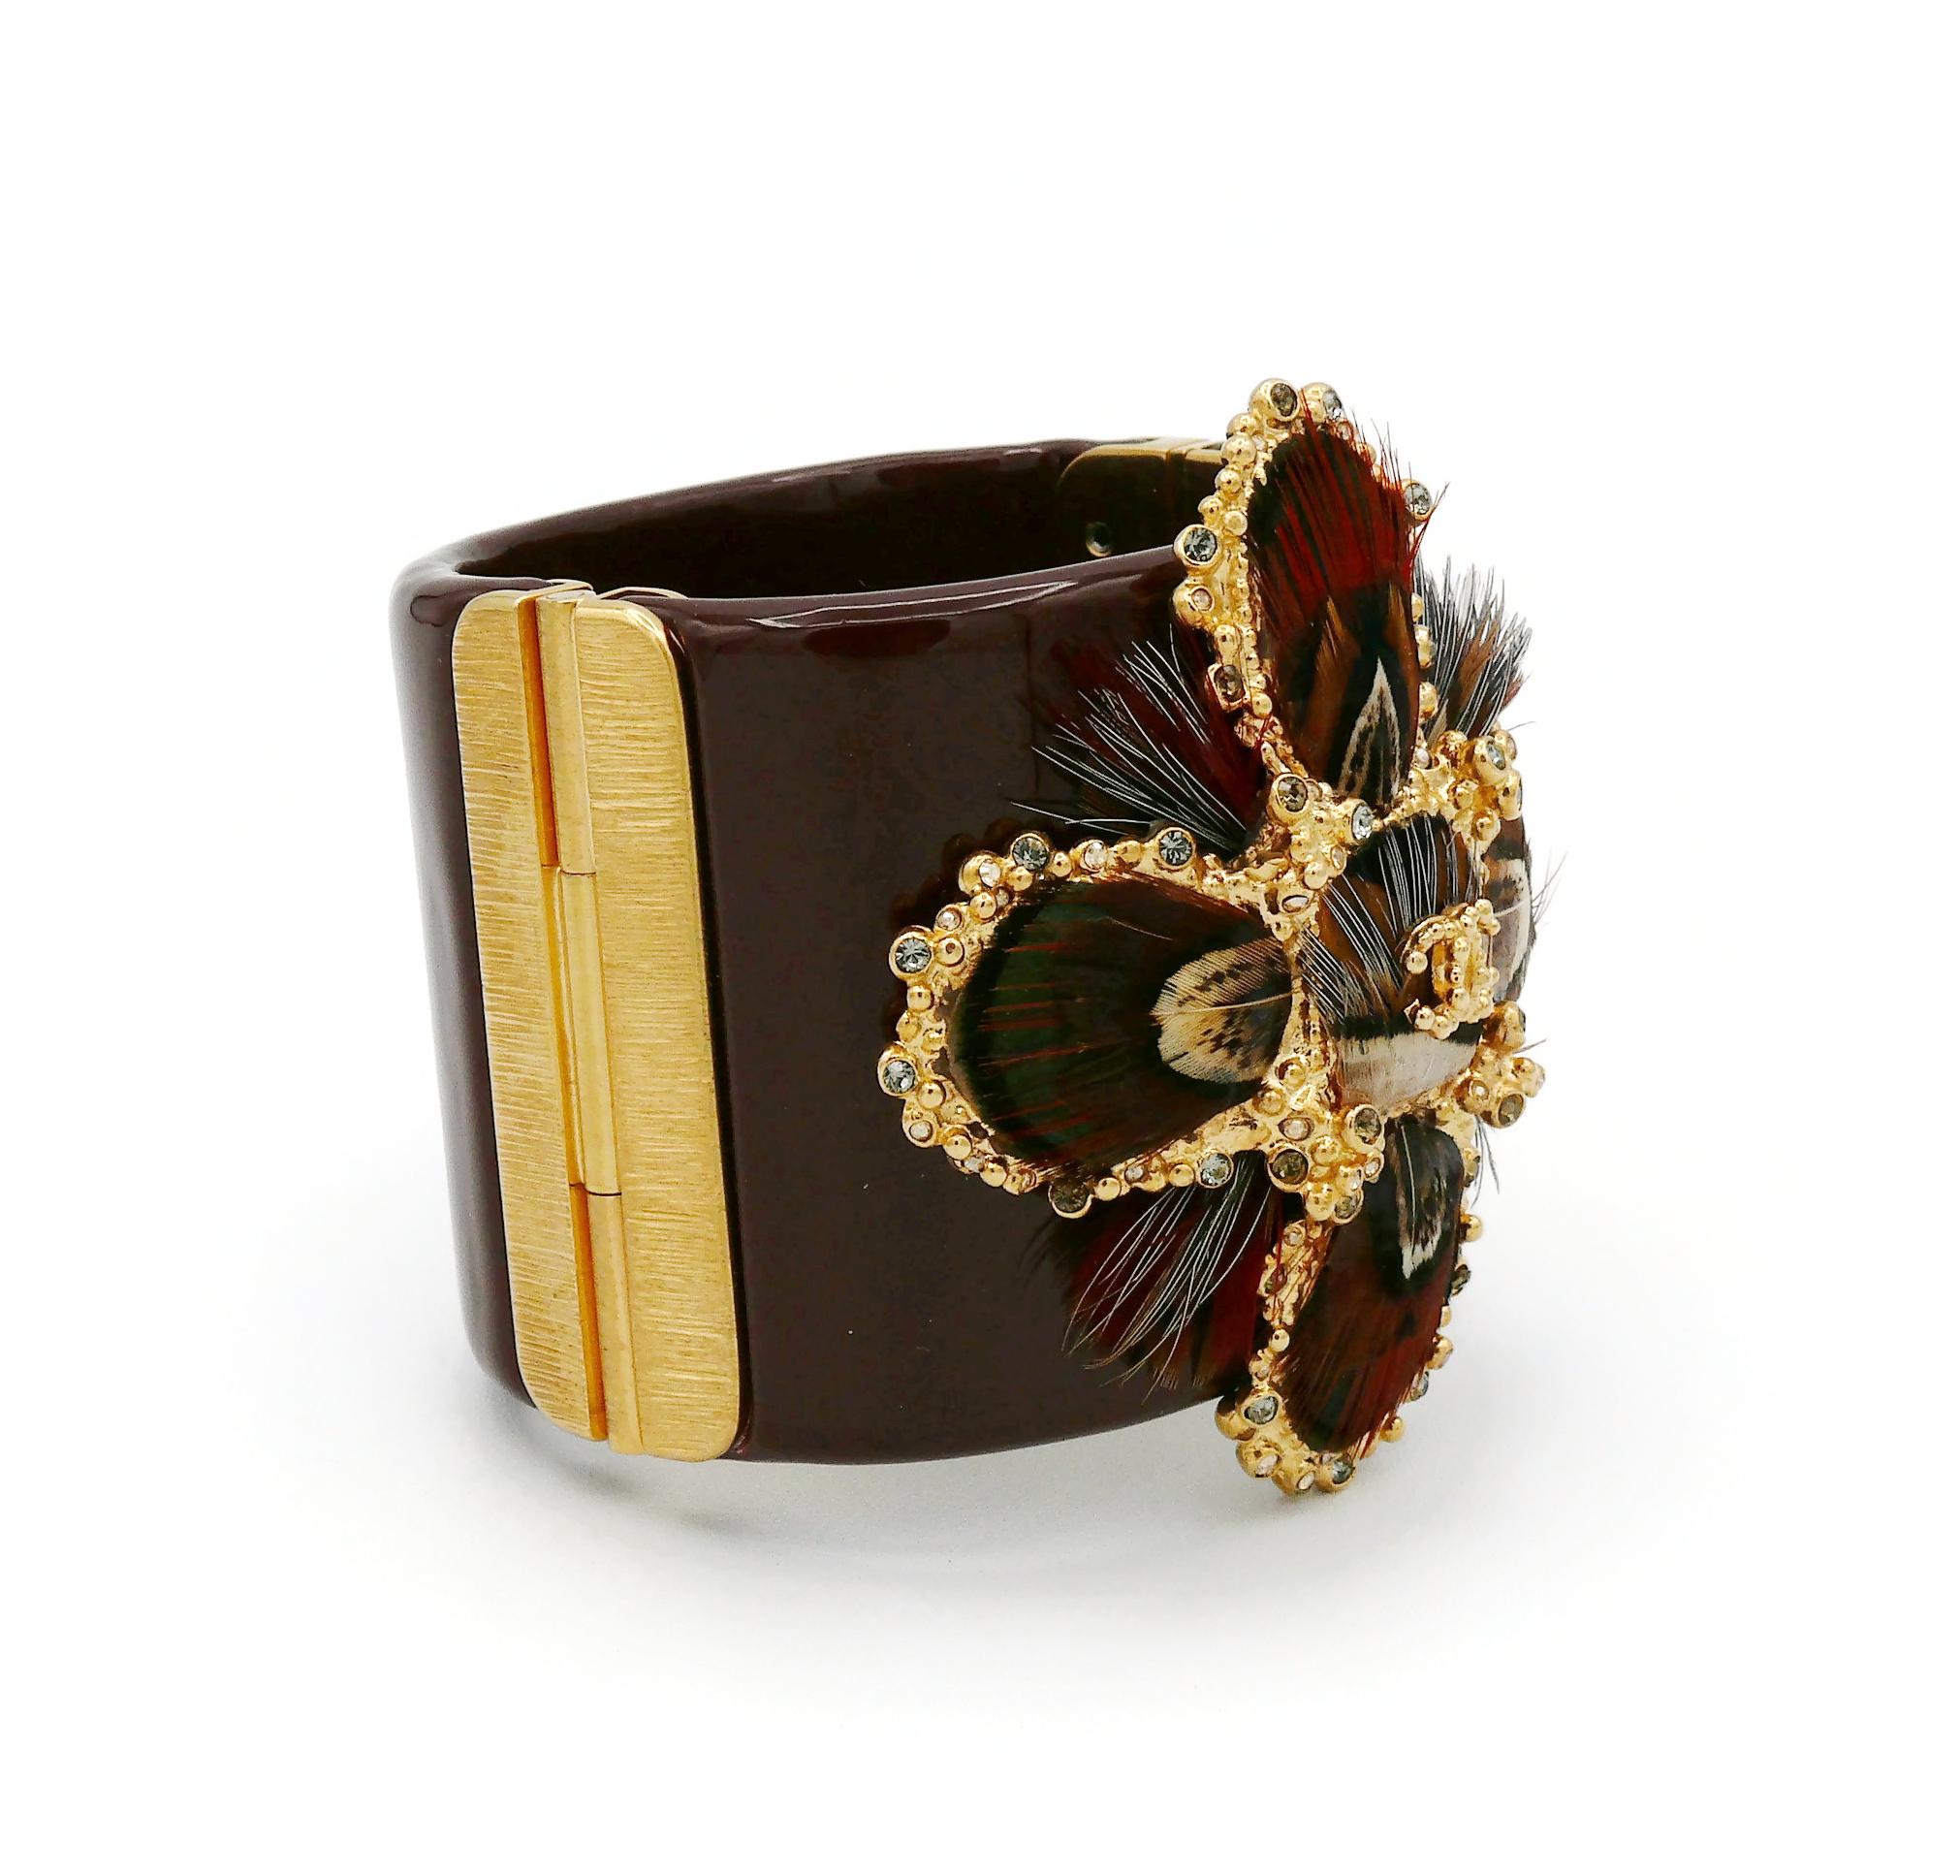 Chanel Burgundy Resin and Feather Cross Cuff Bracelet, Pre-Fall 2013 Collection In Excellent Condition For Sale In Nice, FR